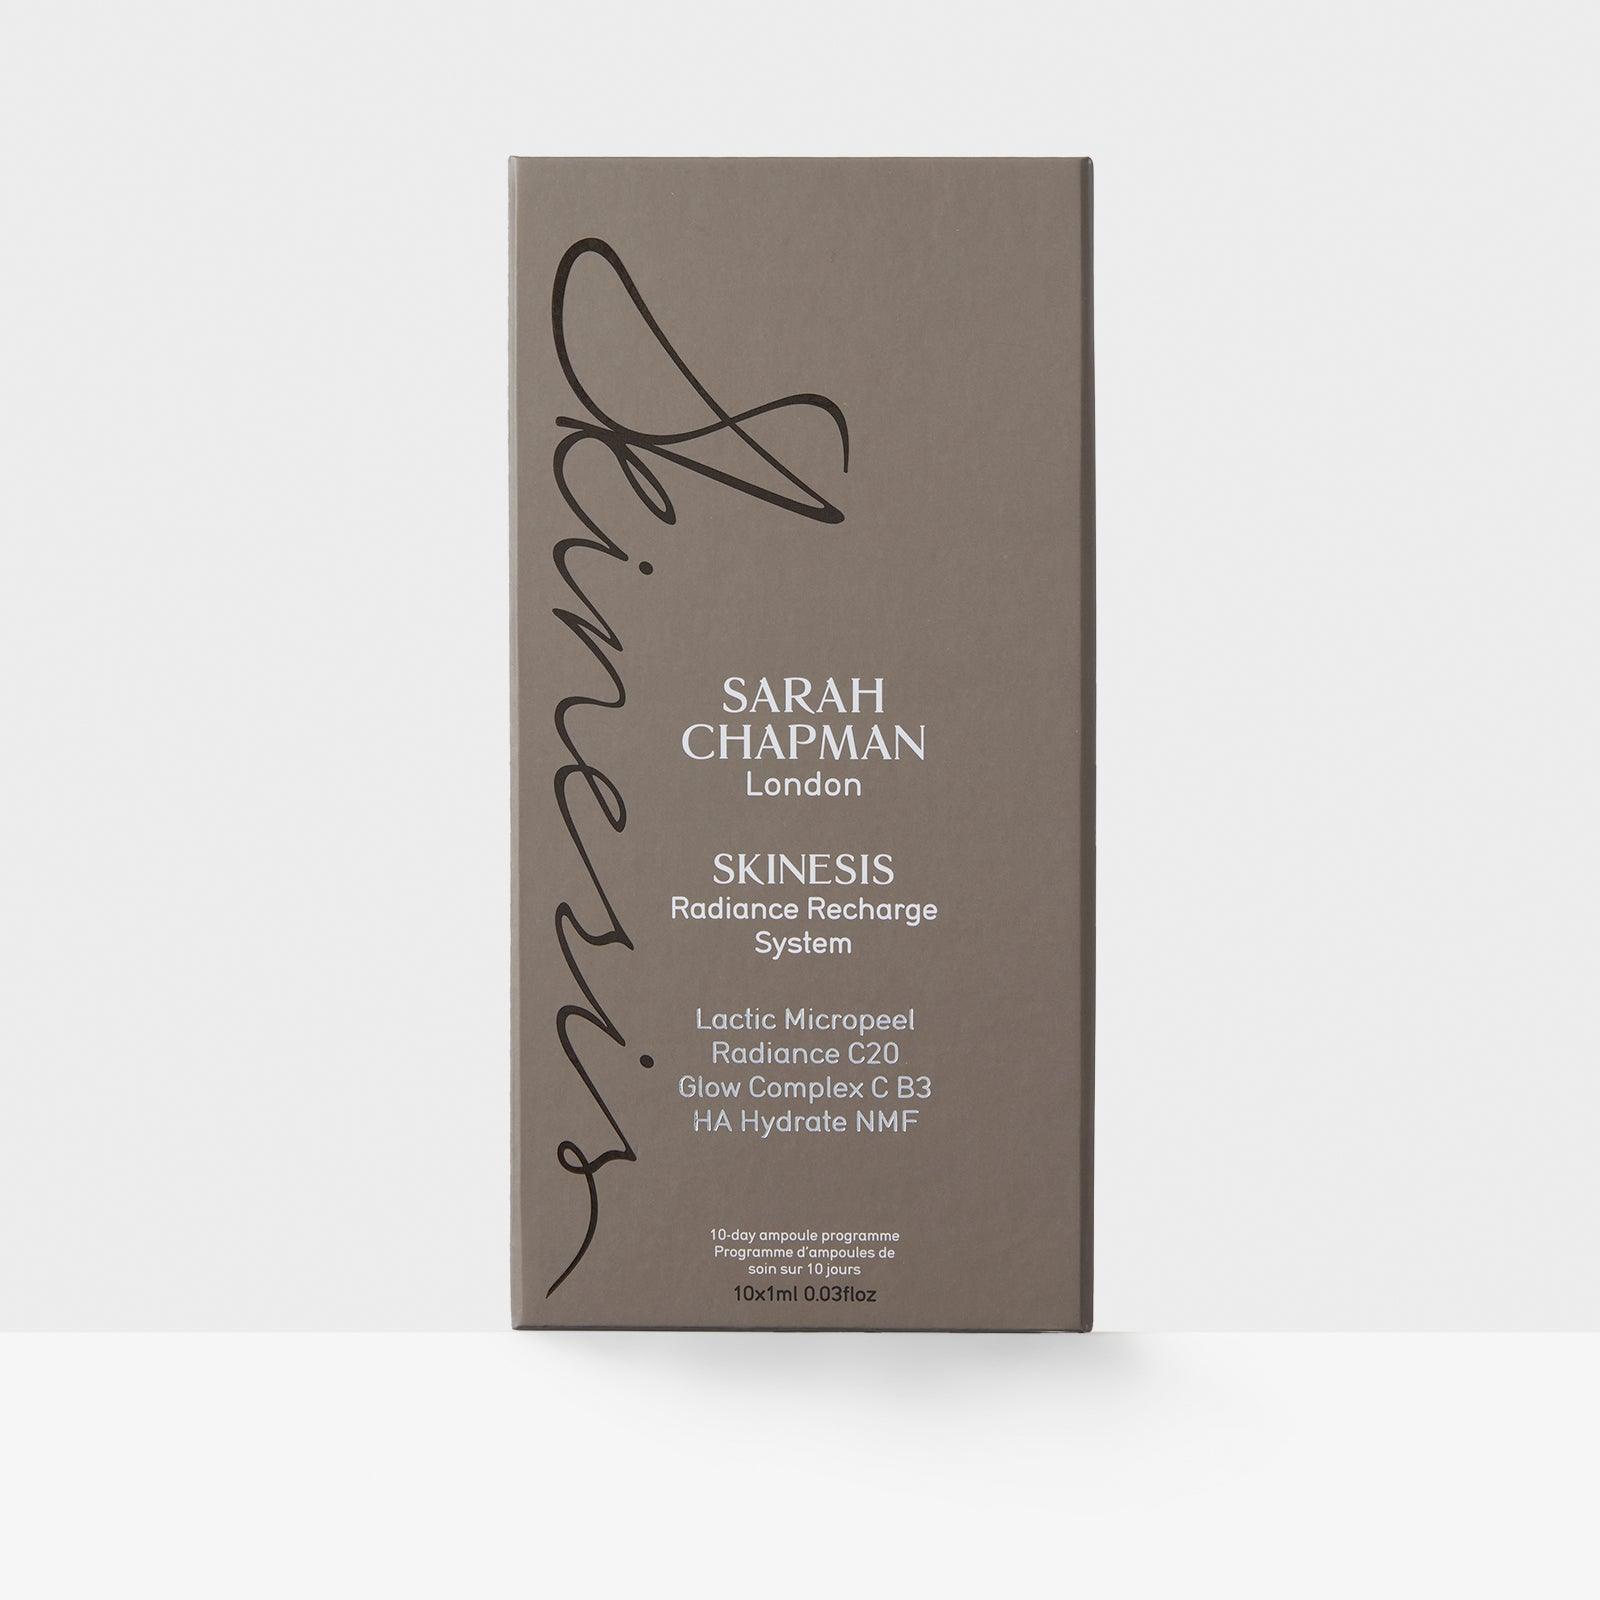 Radiance Recharge System Sarah Chapman Skinesis Outer Packaging